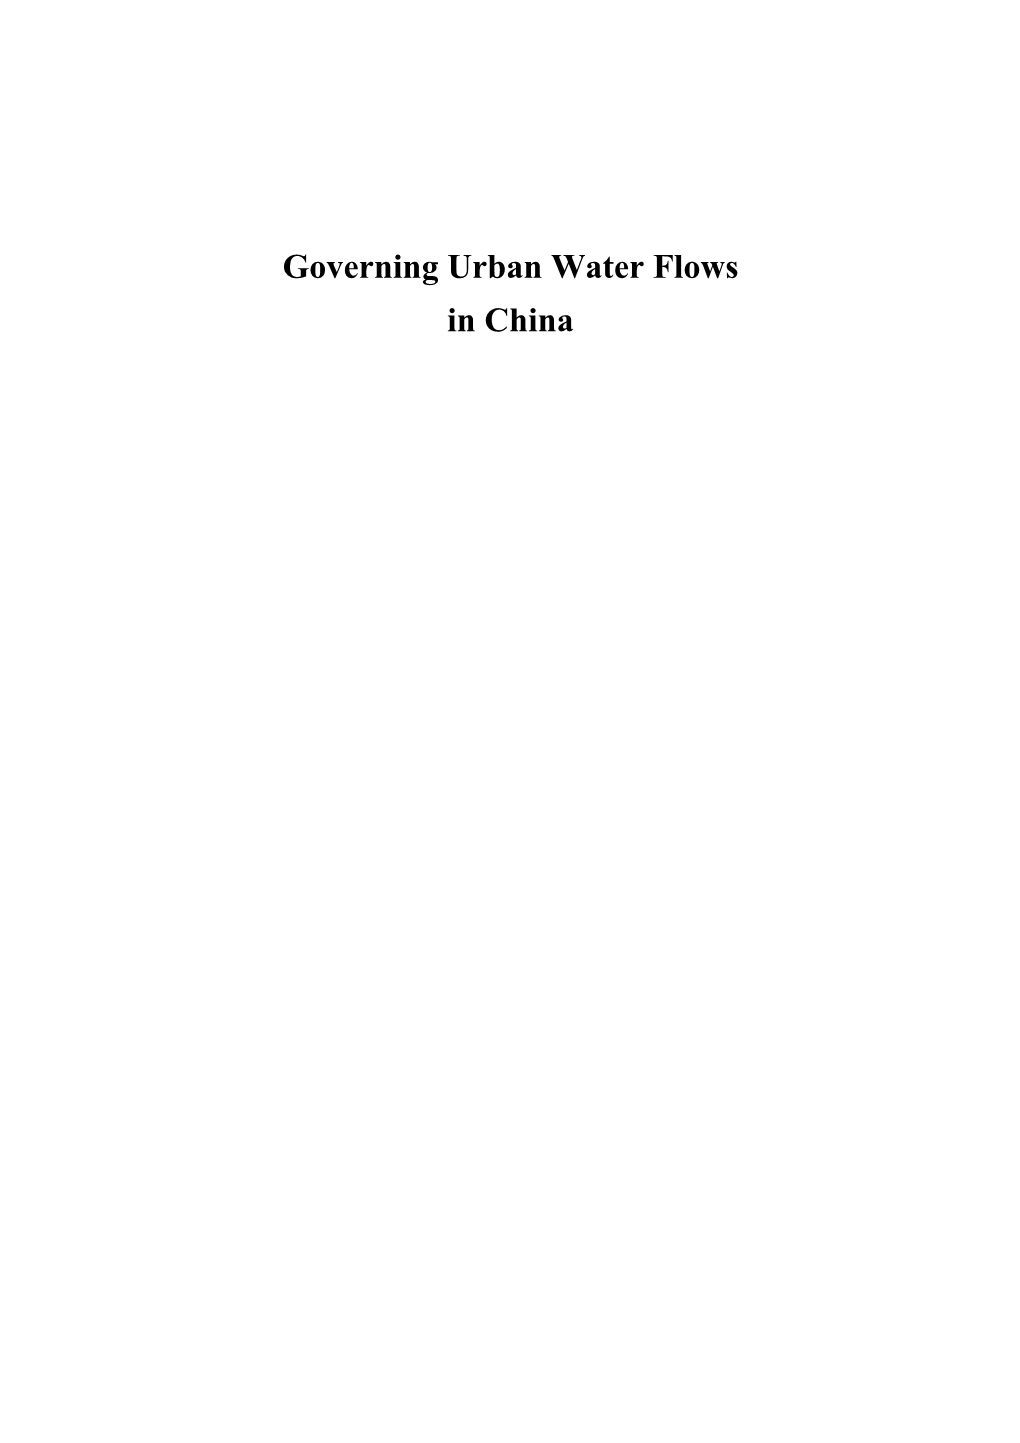 Governing Urban Water Flows in China